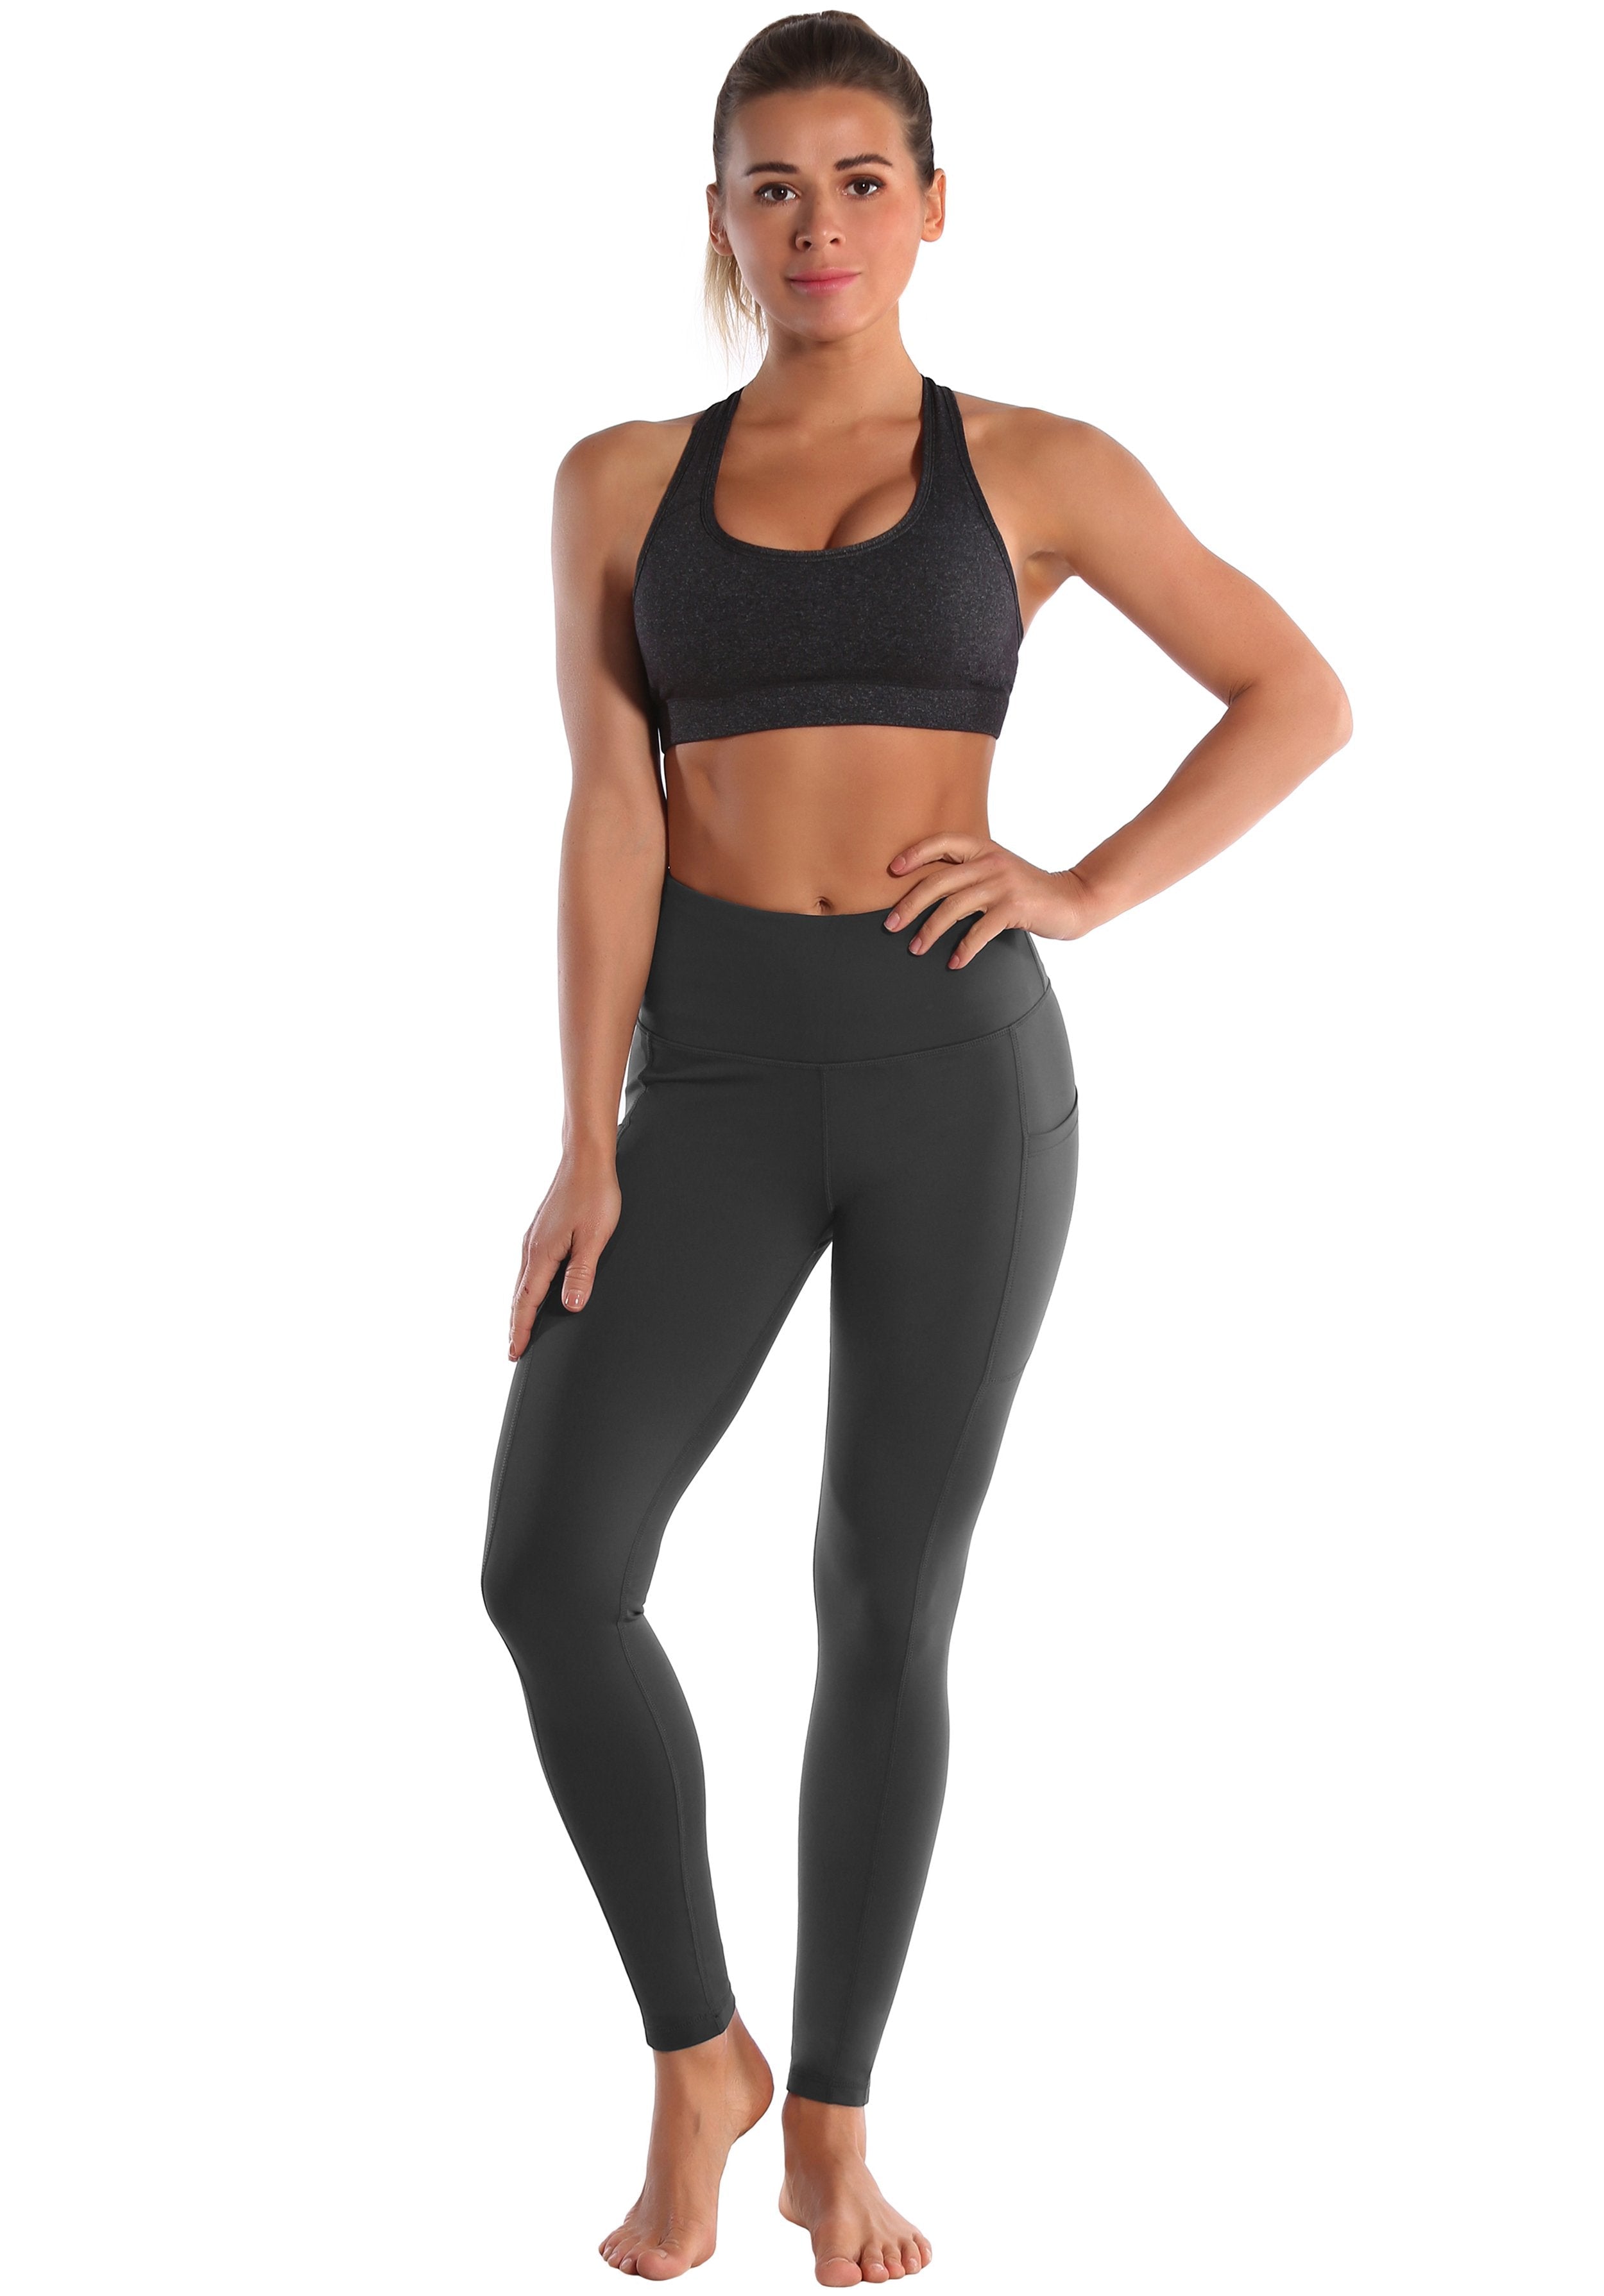 Hip Line Side Pockets Plus Size Pants shadowcharcoal Sexy Hip Line Side Pockets 75%Nylon/25%Spandex Fabric doesn't attract lint easily 4-way stretch No see-through Moisture-wicking Tummy control Inner pocket Two lengths